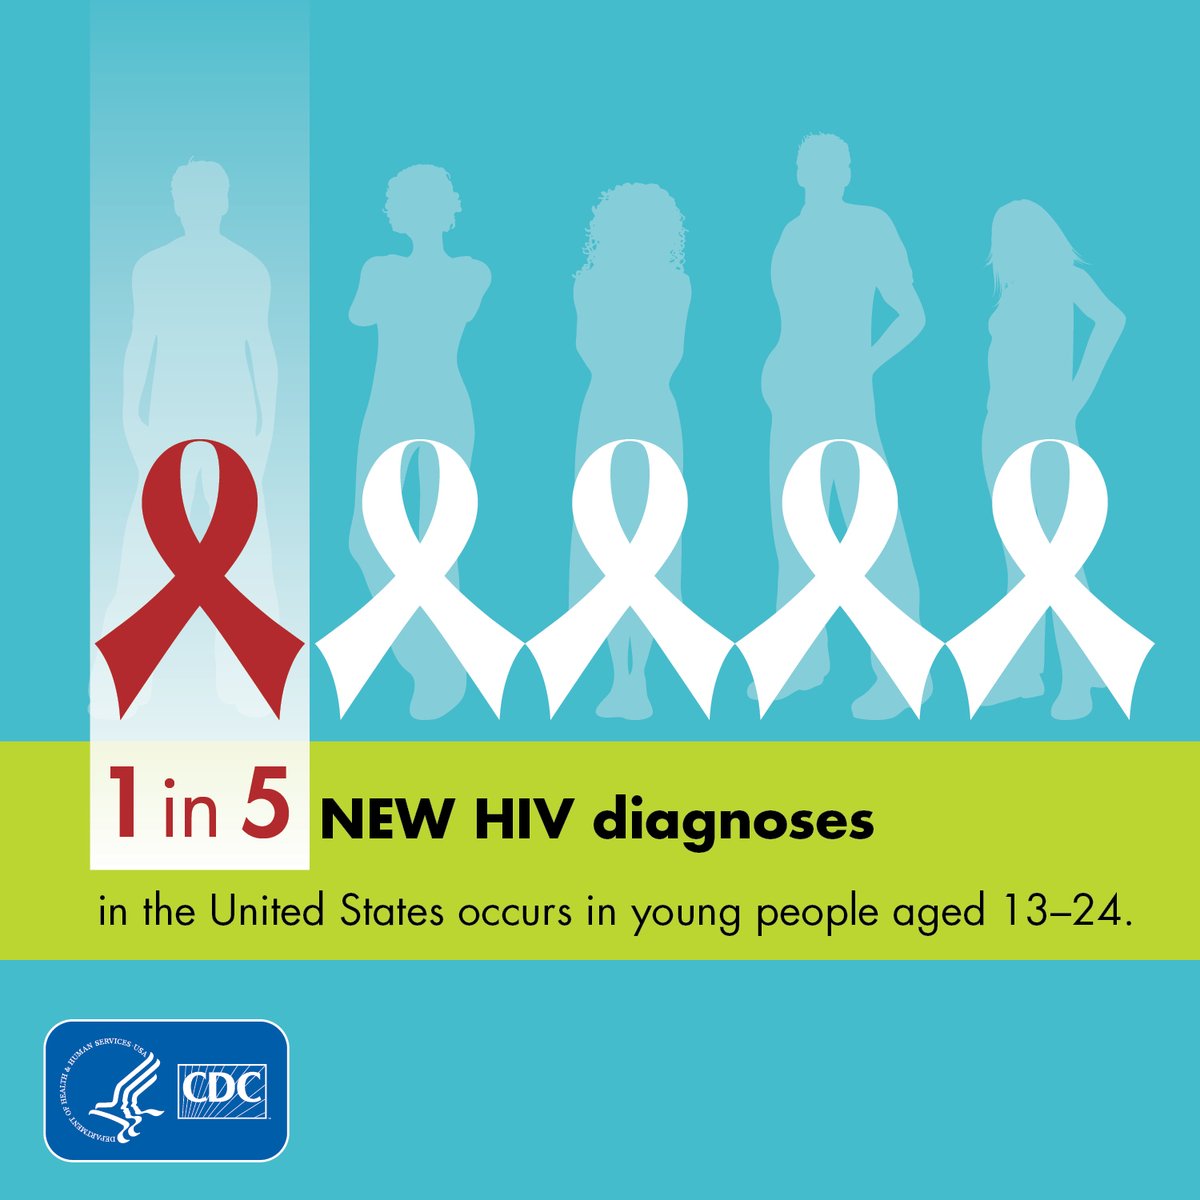 1 in 5 new HIV diagnoses occurs in young people ages 13-24. This National Youth HIV & AIDS Awareness Day, review @CDC_DASH’s #WhatWorksInSchools program to learn why investing in health education and services for youth is critical to ending HIV: bit.ly/3PkTOC5. #NYHAAD